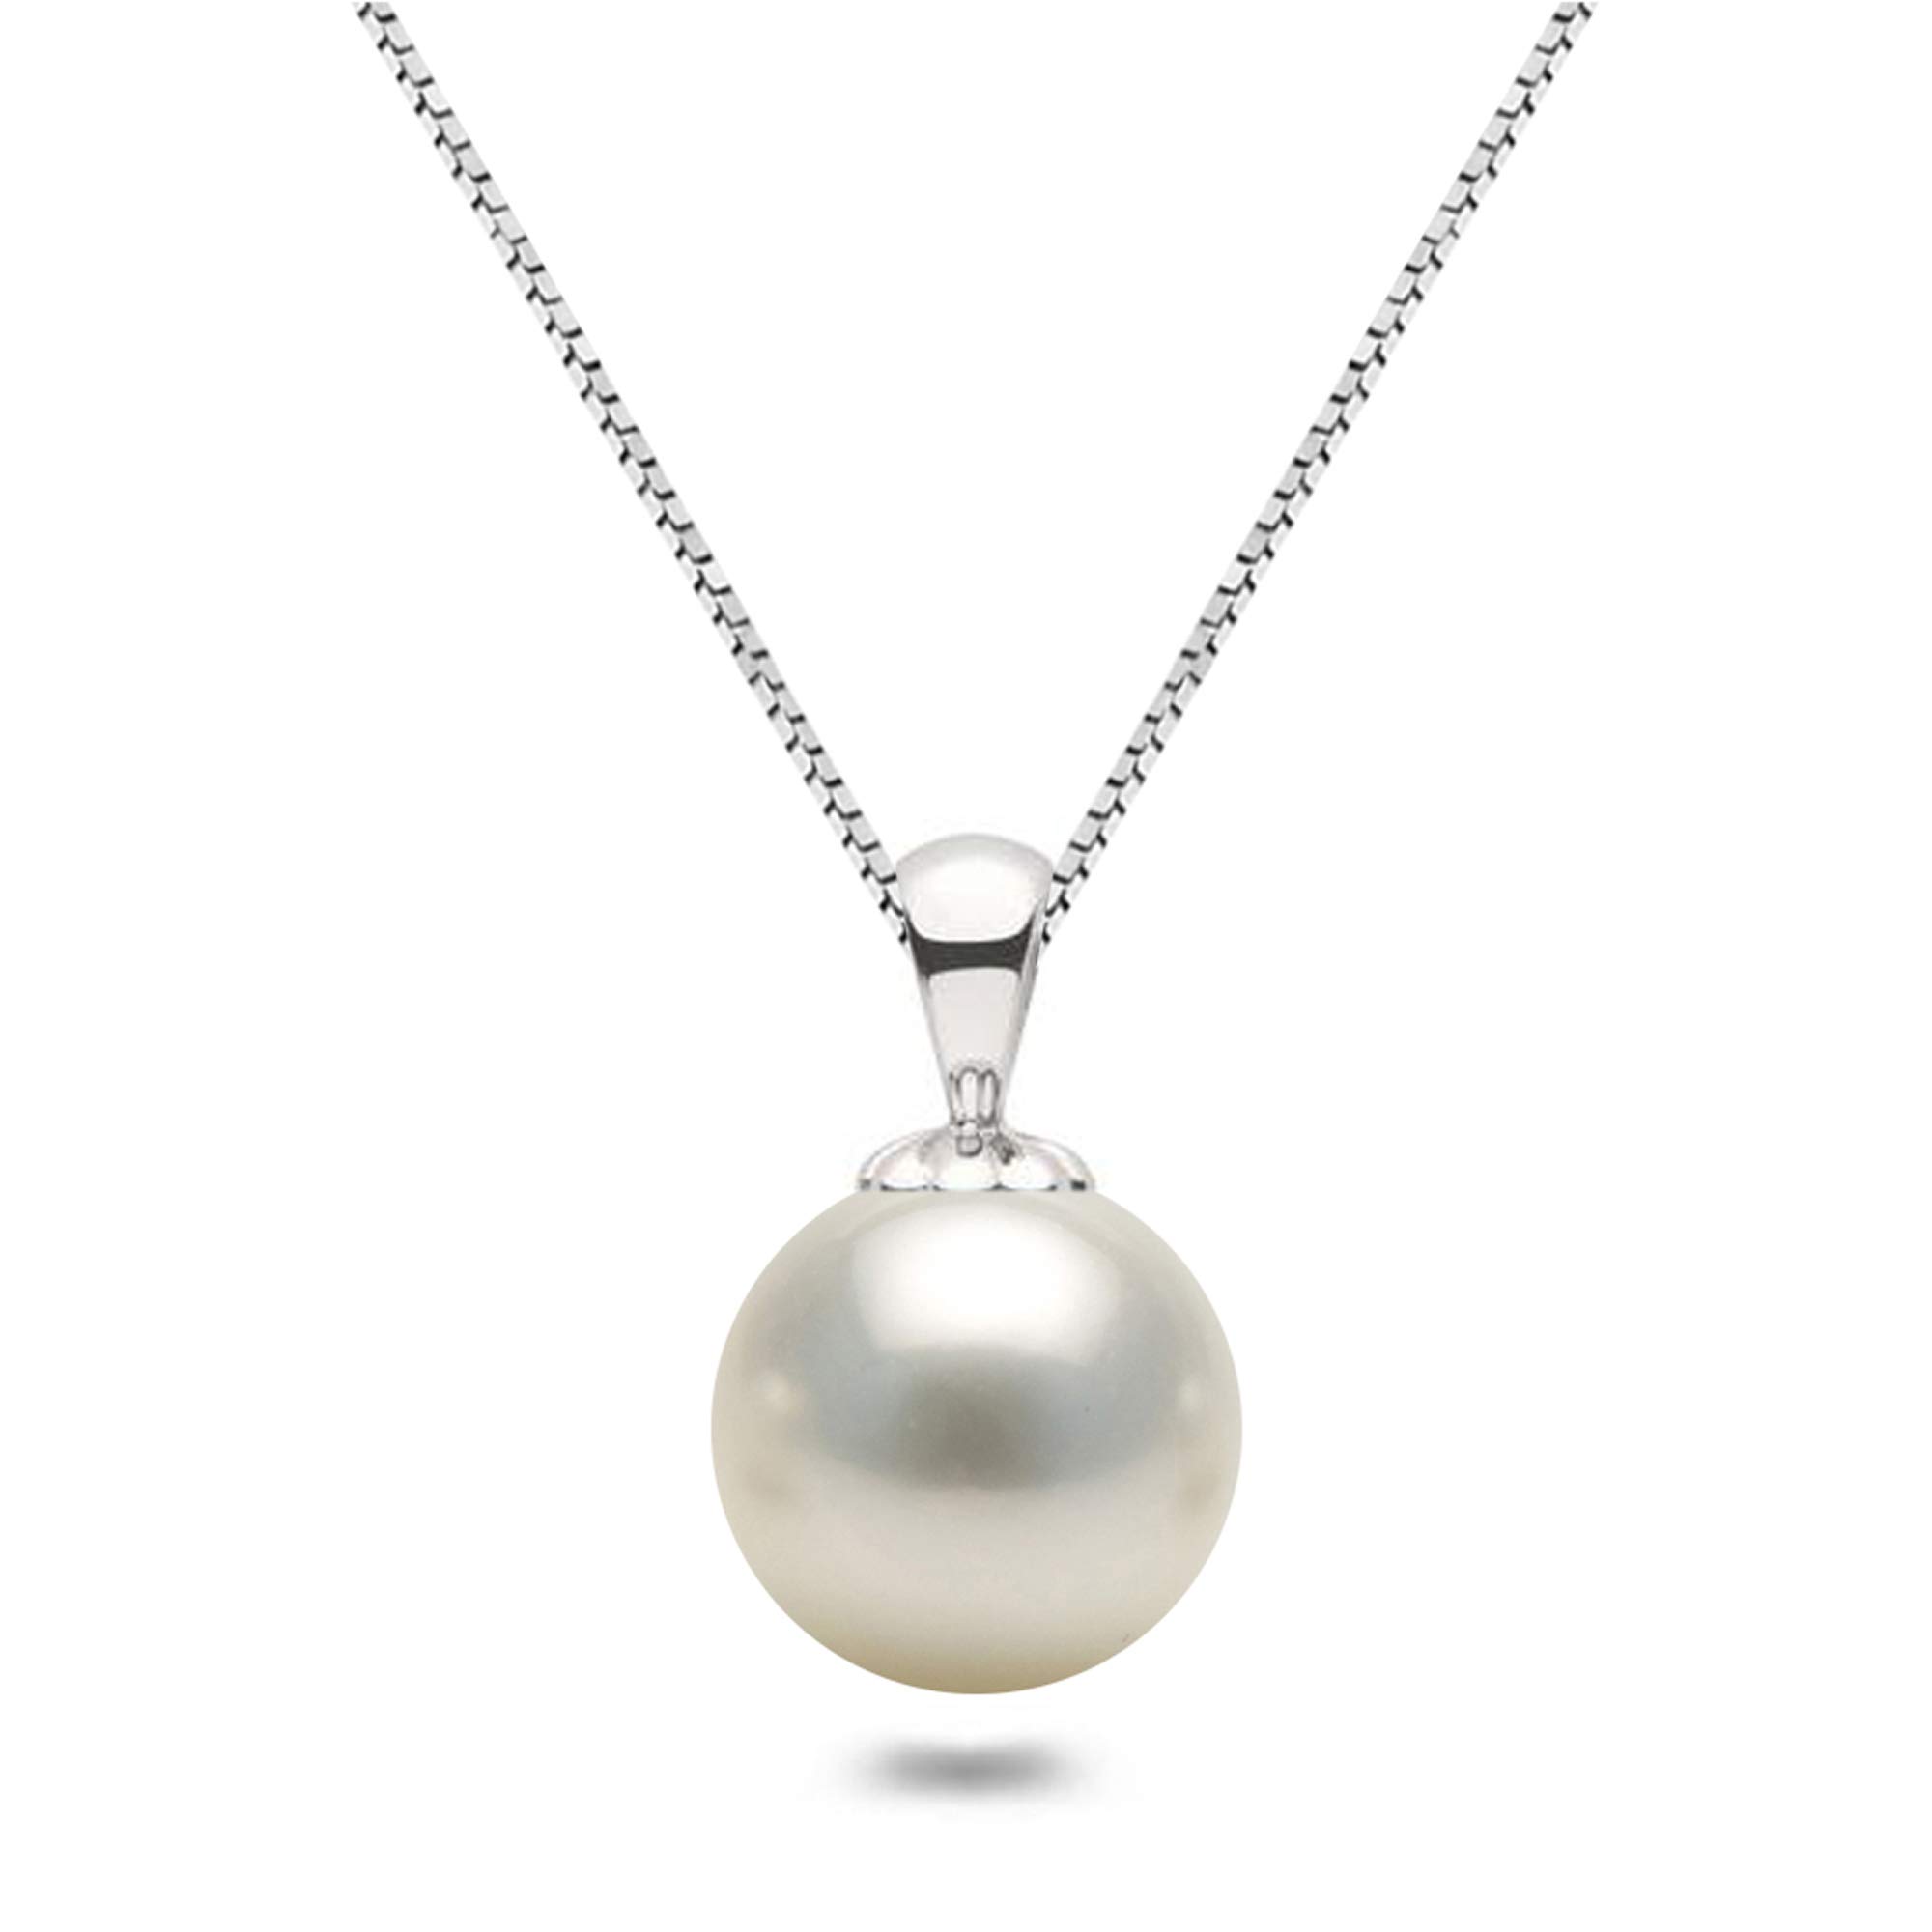 Orien Jewelry White Japanese AAAA 6-10mm Akoya Cultured Pearl Pendant Necklace 16